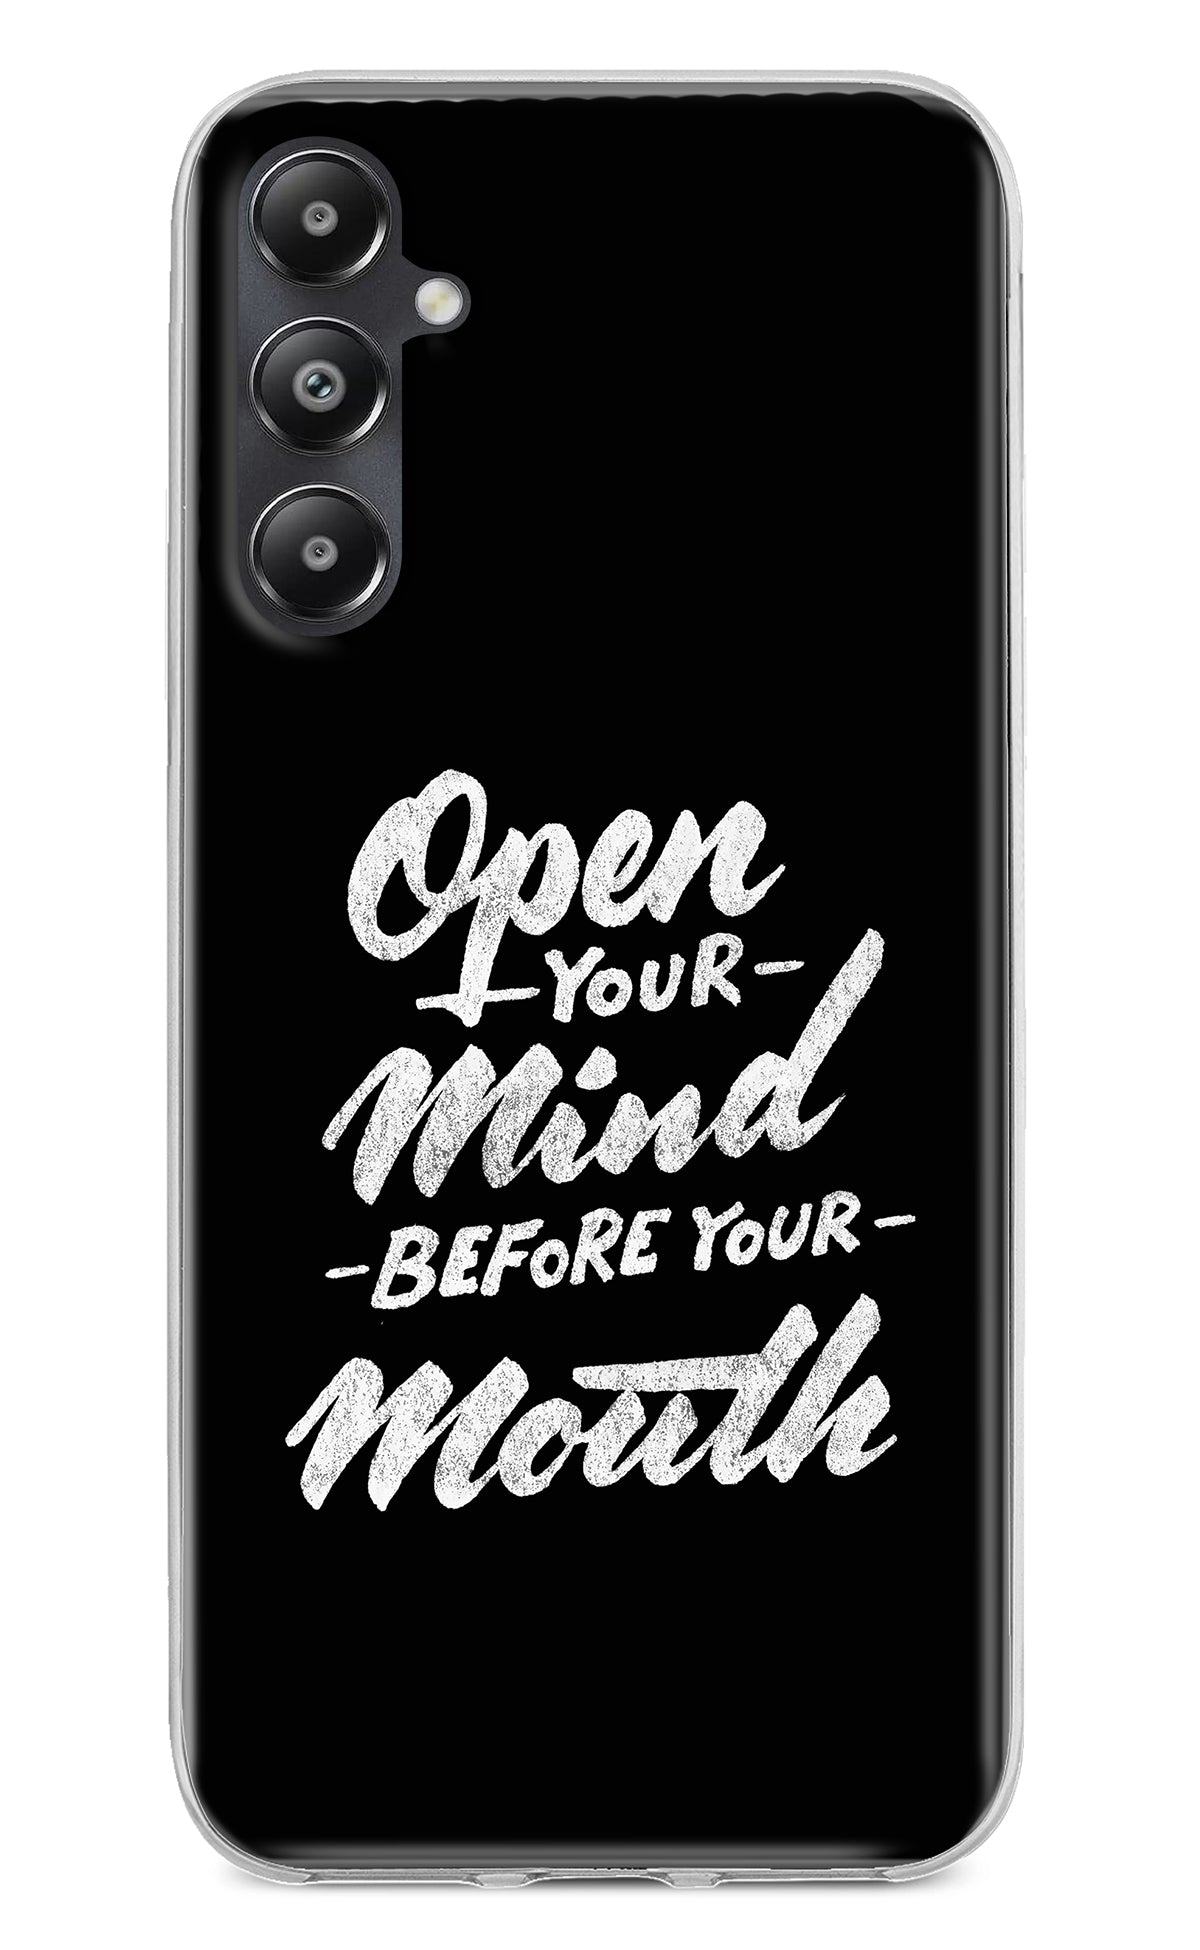 Open Your Mind Before Your Mouth Samsung A05s Back Cover